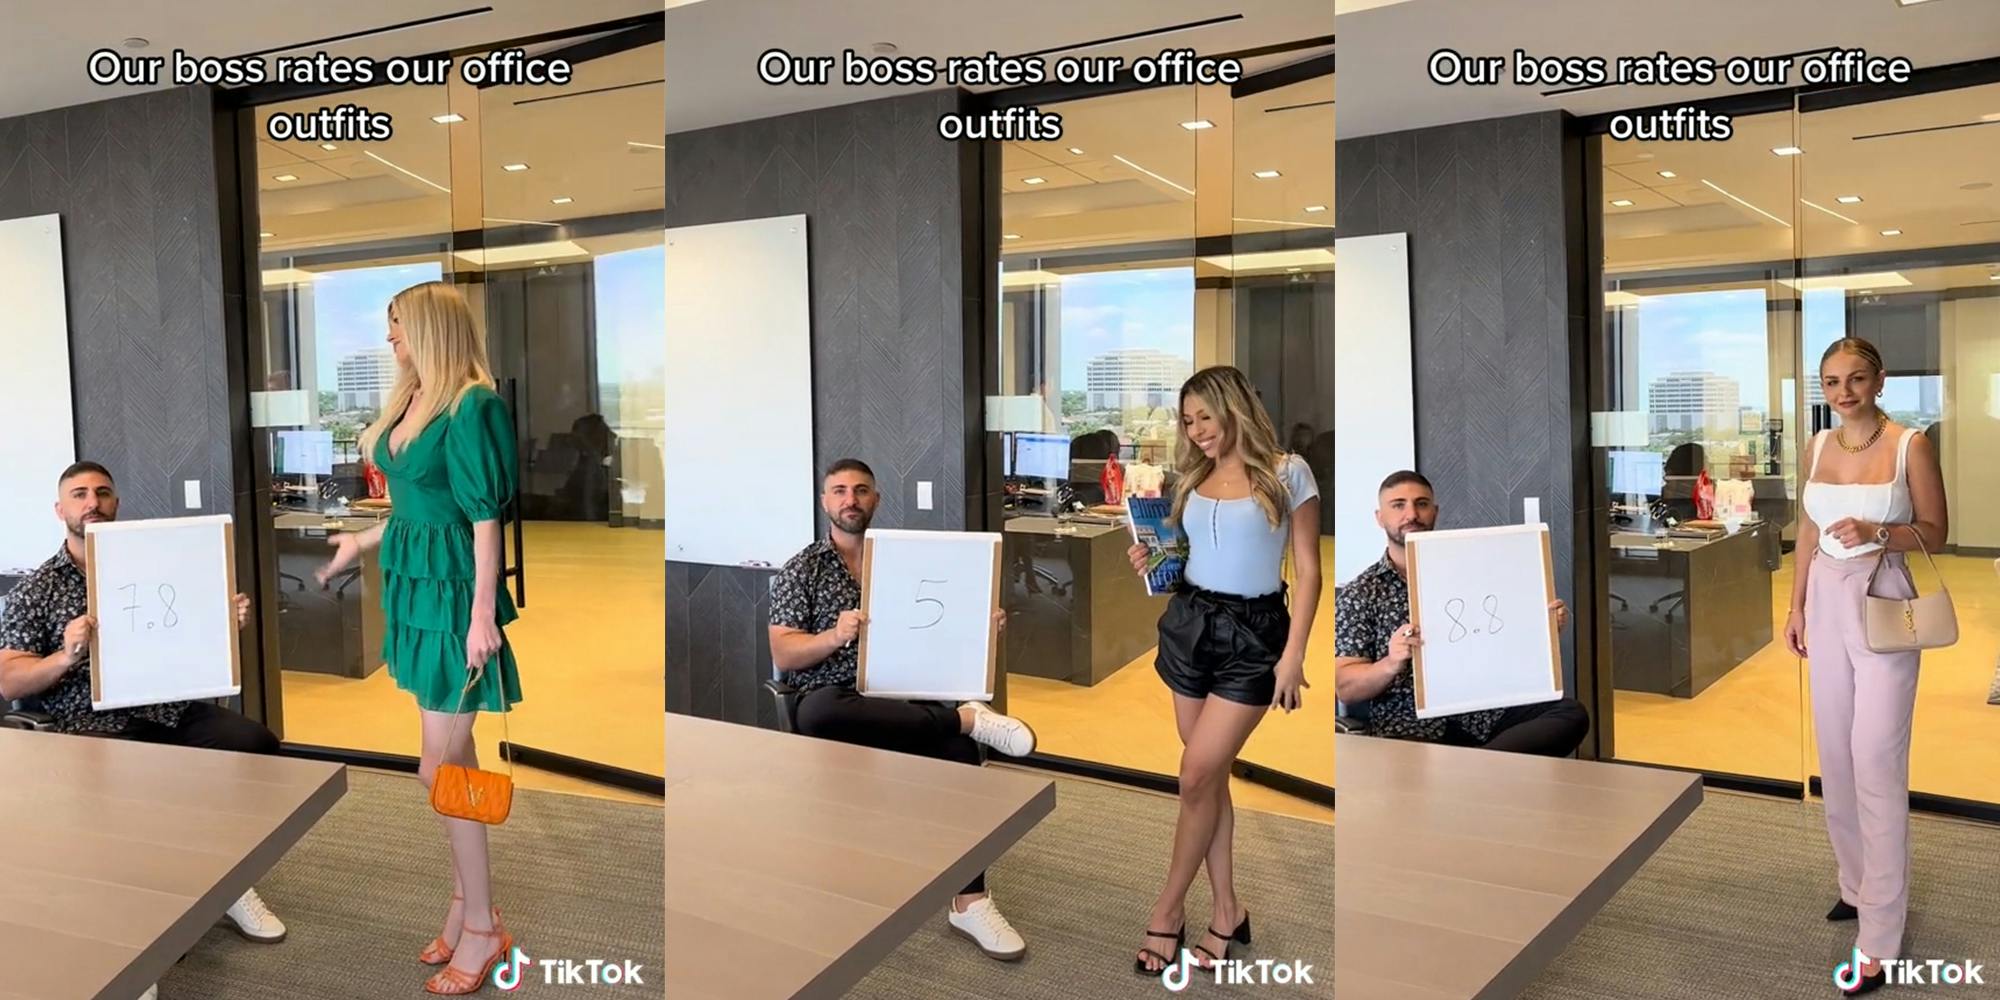 man holding white sign with number on it while women walk through doorway with caption "our boss reviews our office outfits"